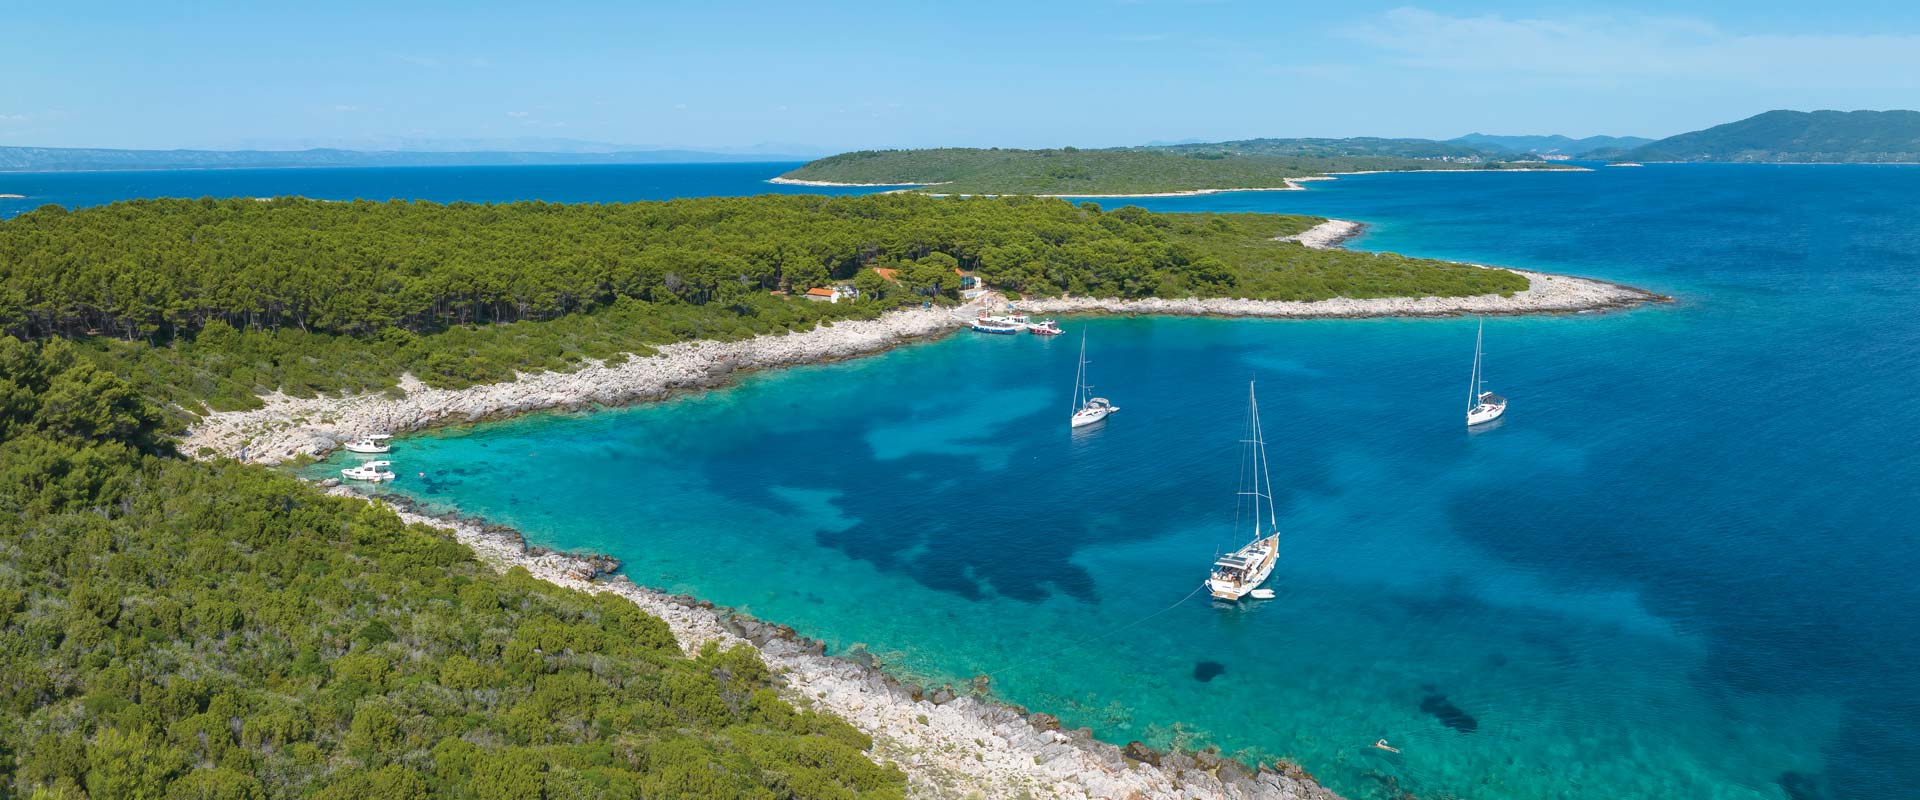 Discover the most beautiful sides of Croatia